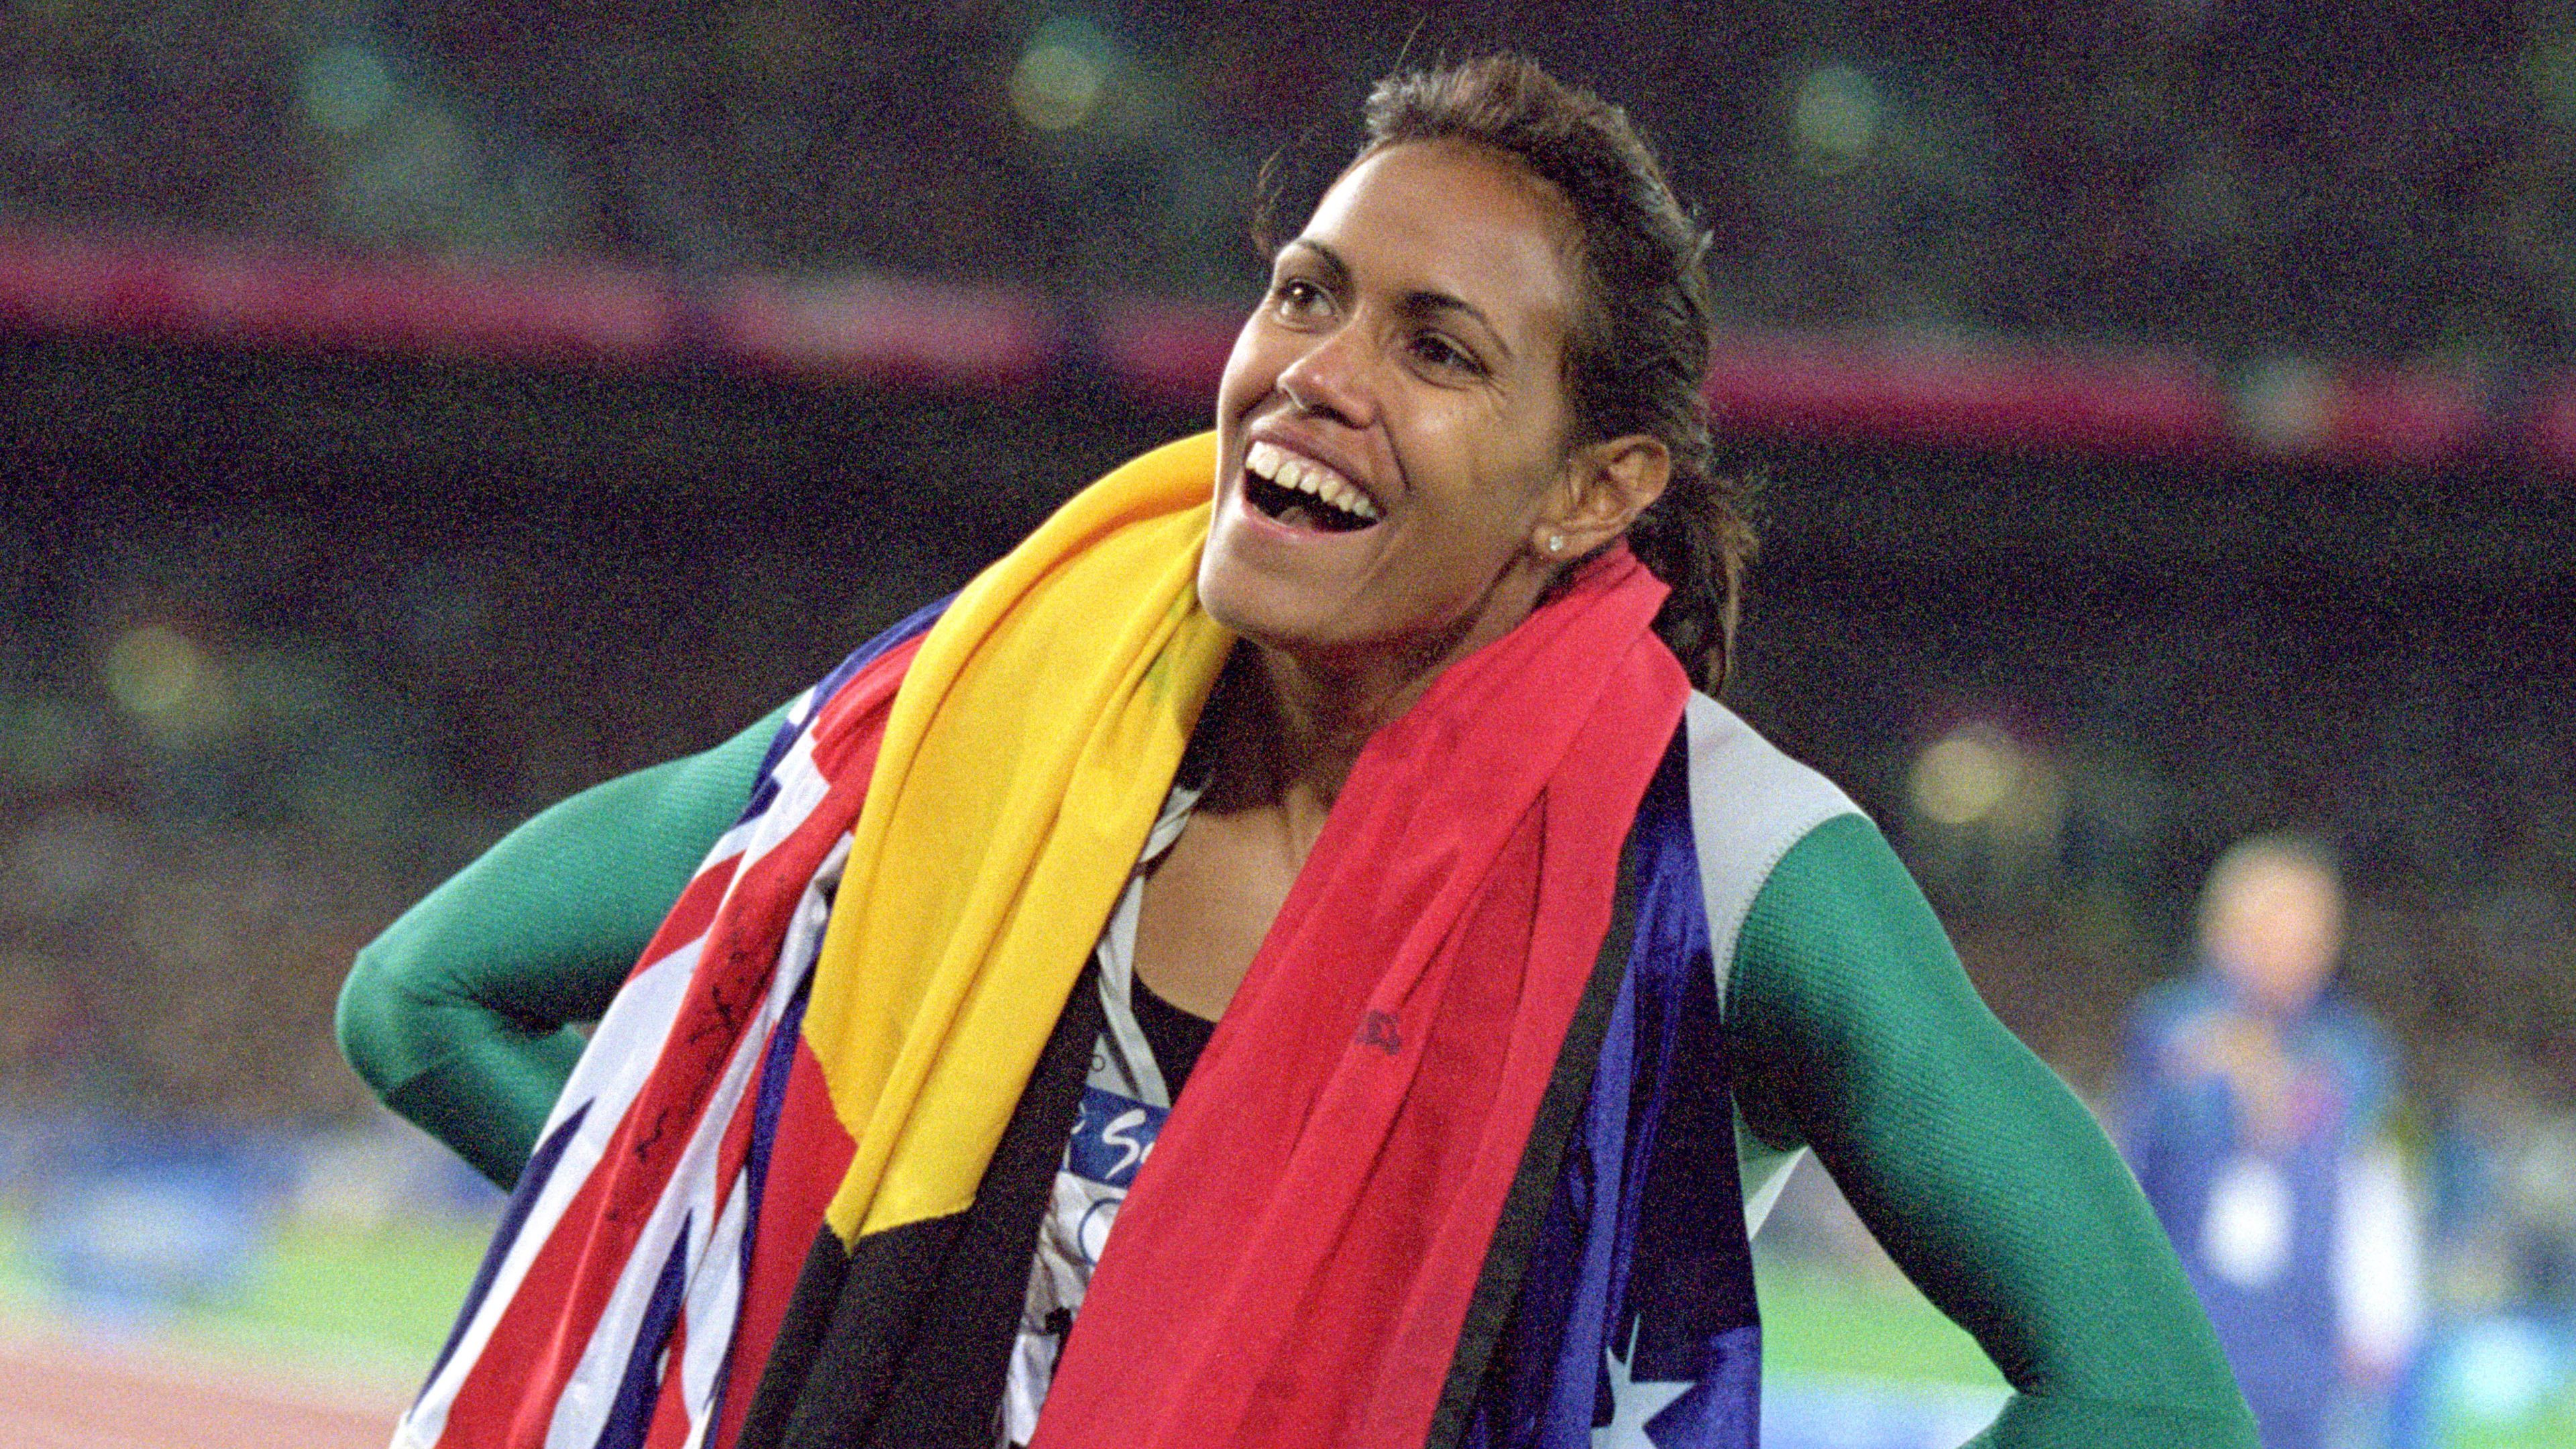 Cathy Freeman of Australia is elated after winning gold in the 400m final during the 2000 Sydney Olympic Games. 